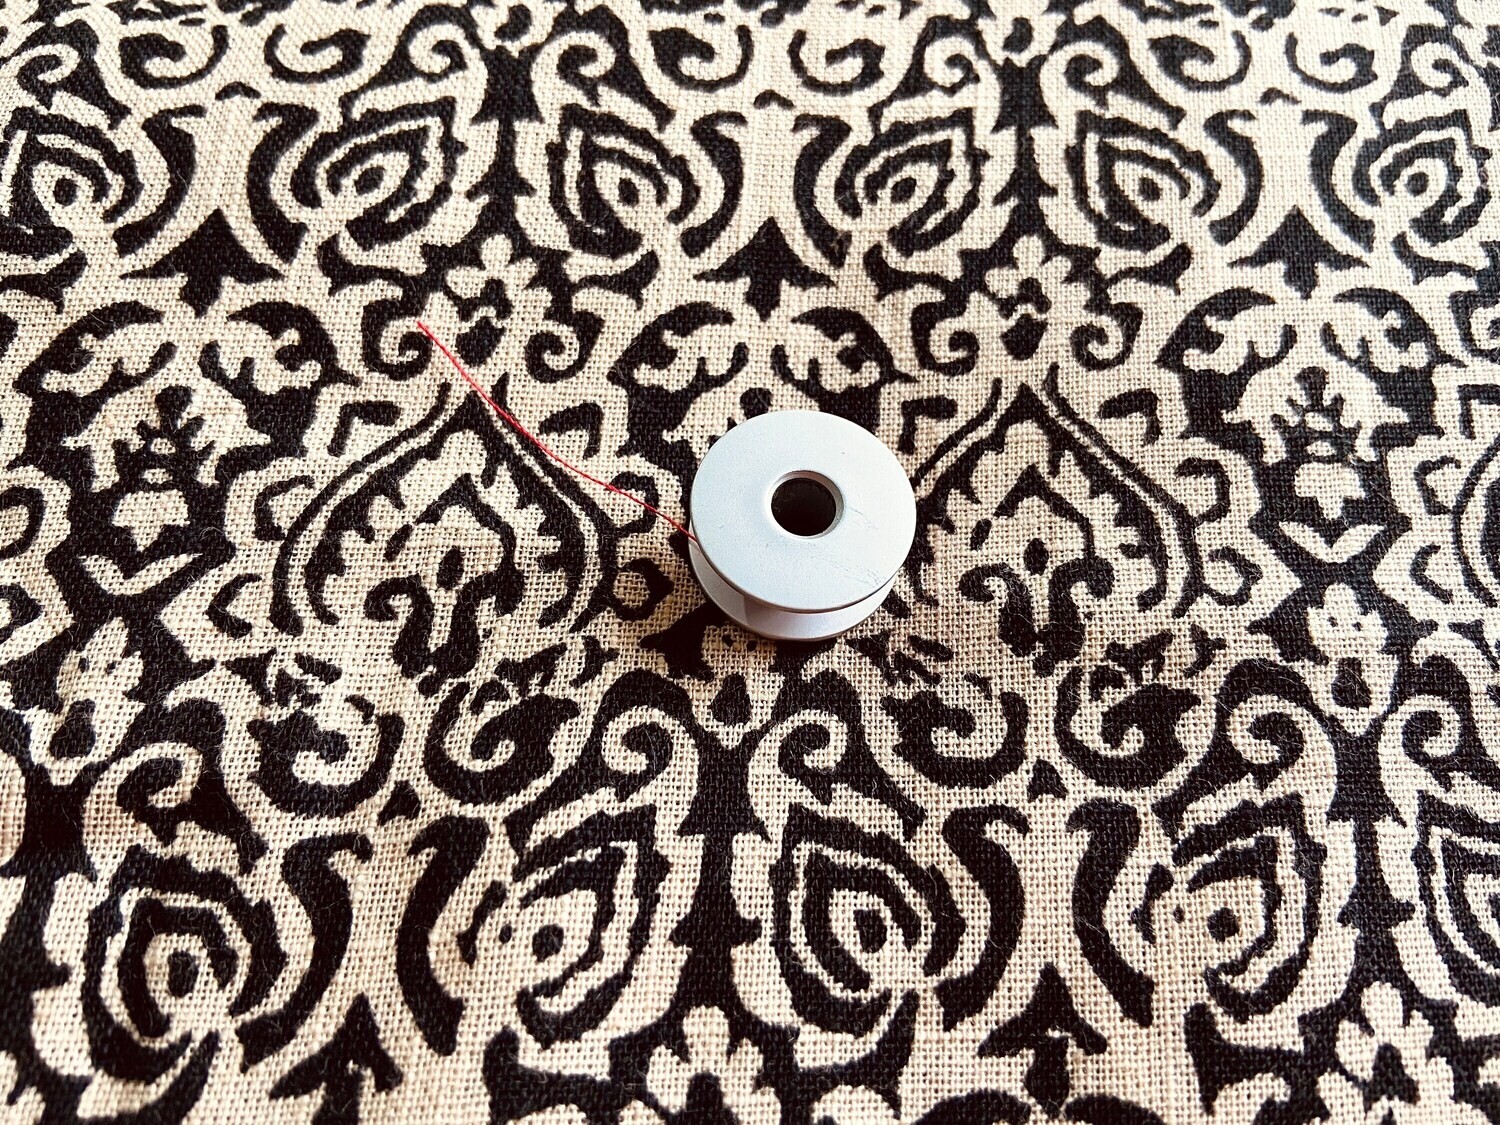 Black and Cream Block Print Linen fabric, Floral Linen Fabrics for Dress Sewing Crafting, 44 Inches Wide